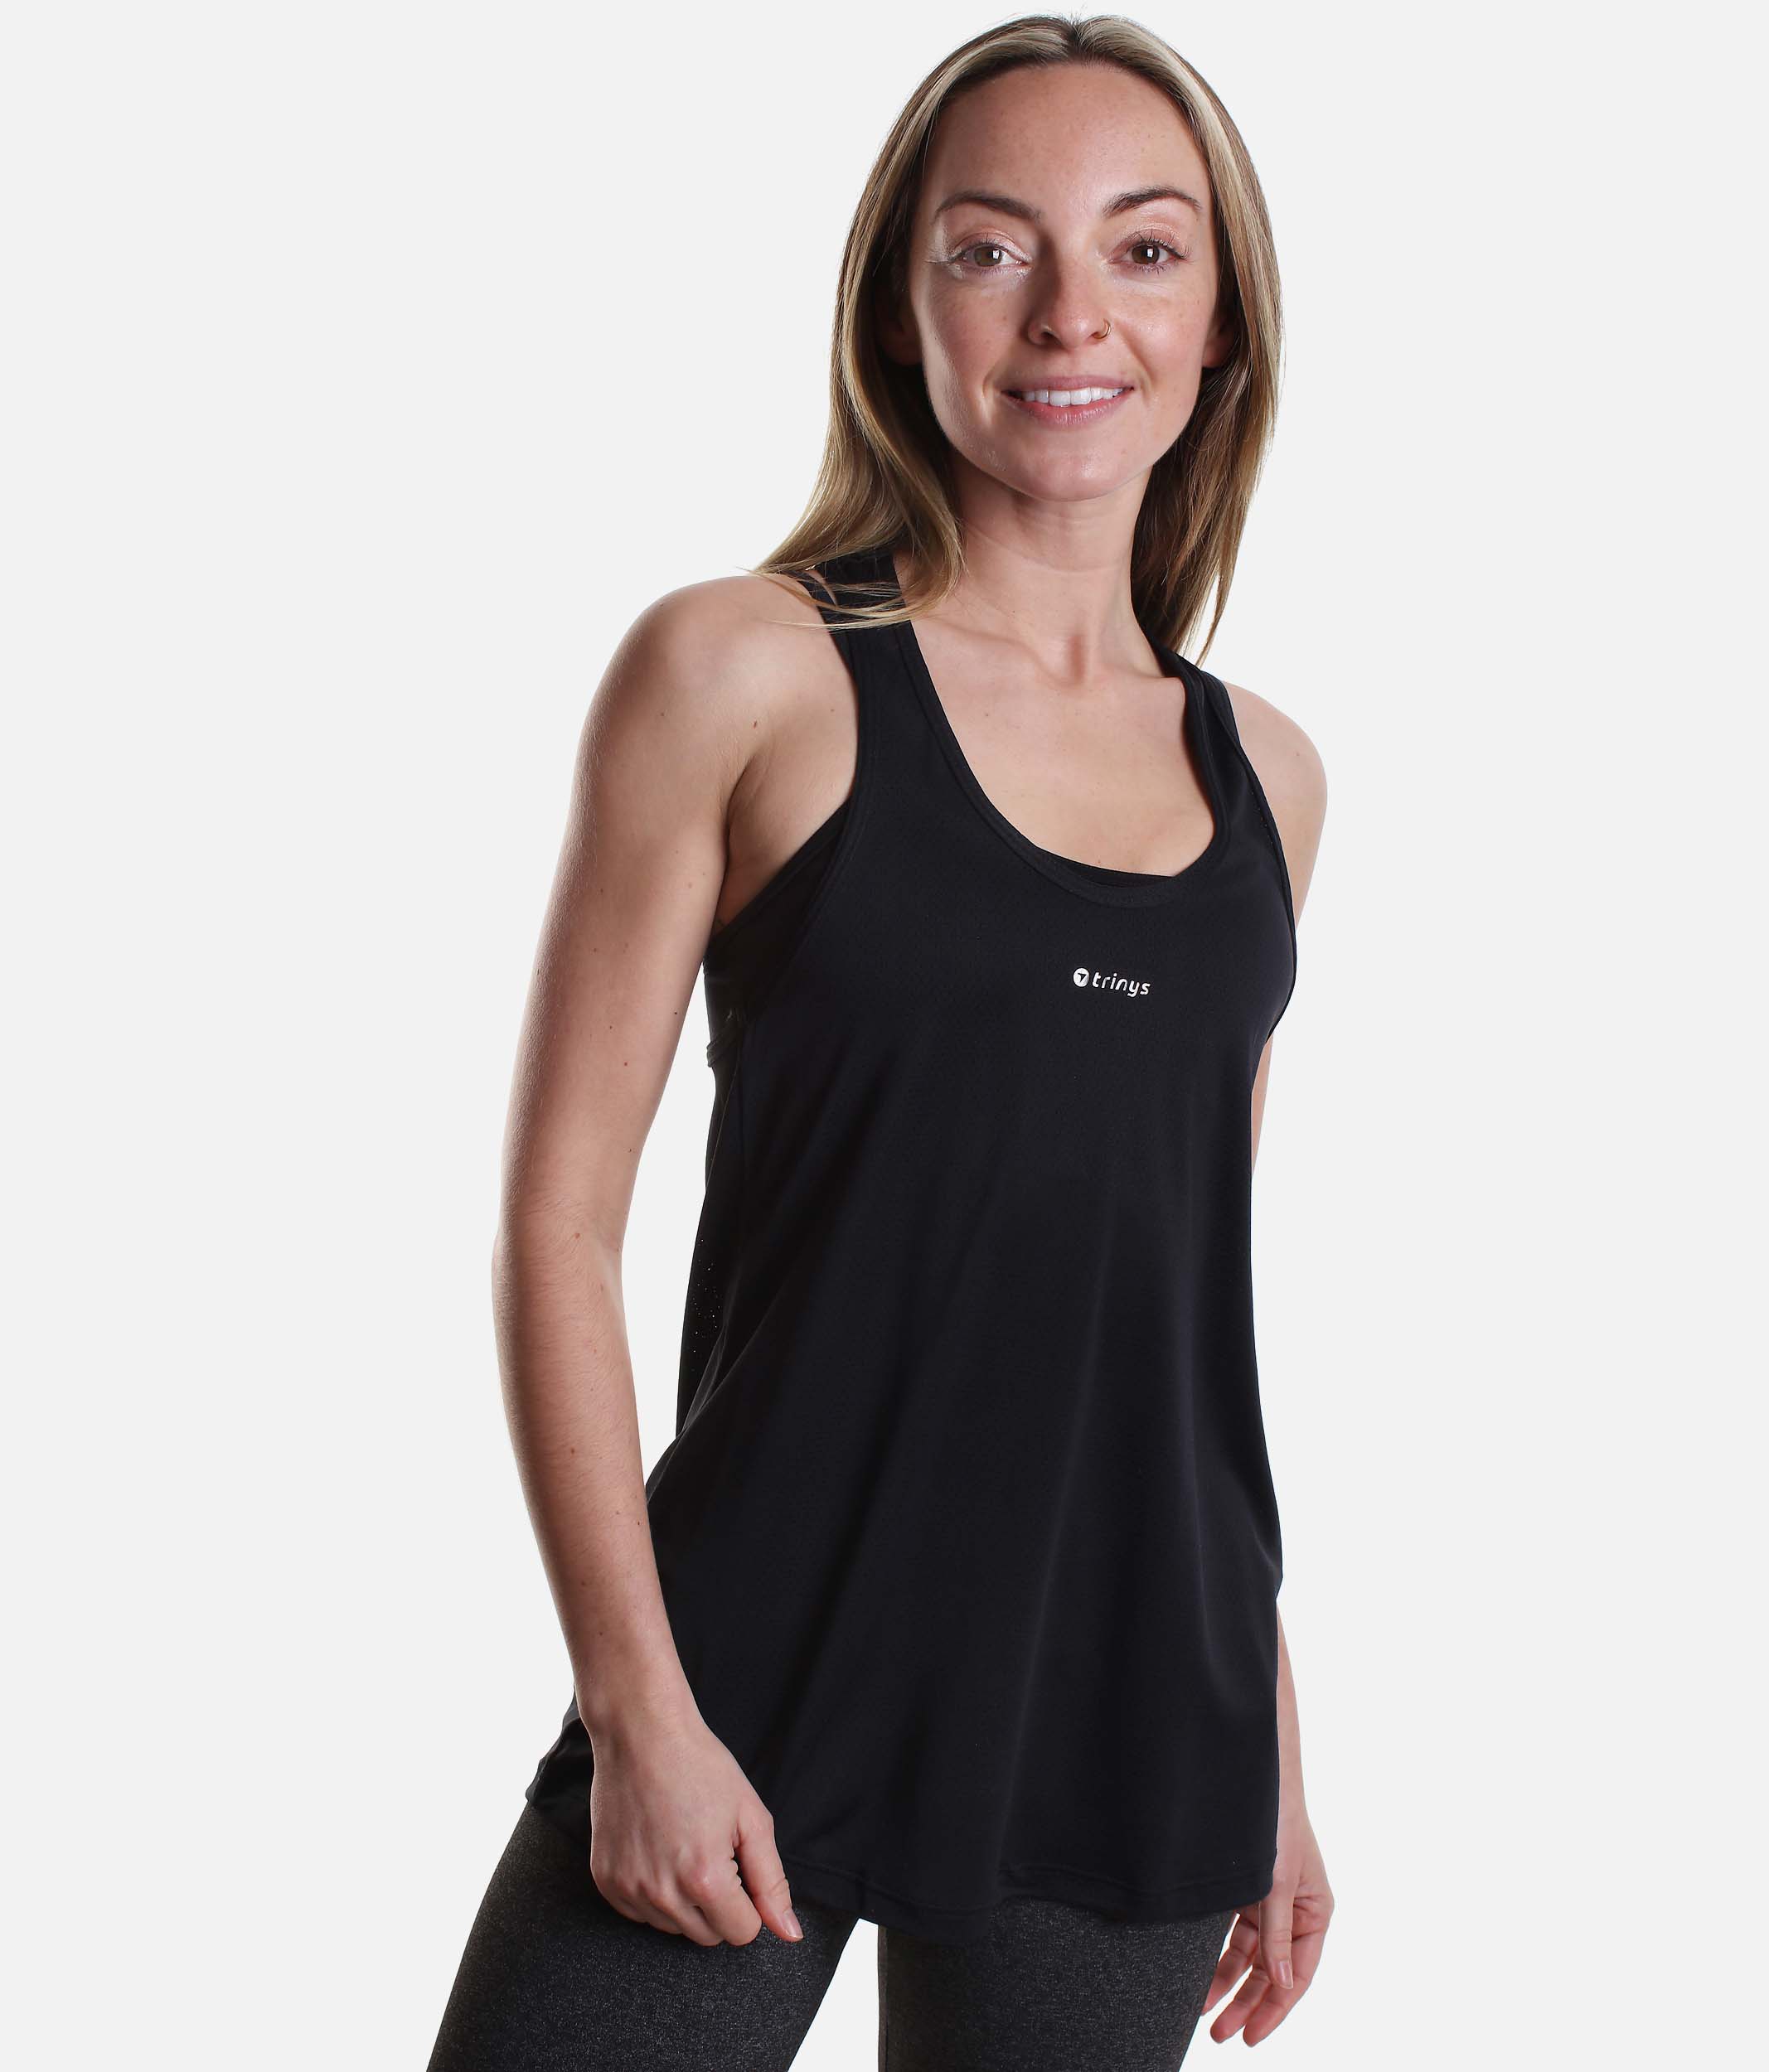 Fitness Tank Top - A 287